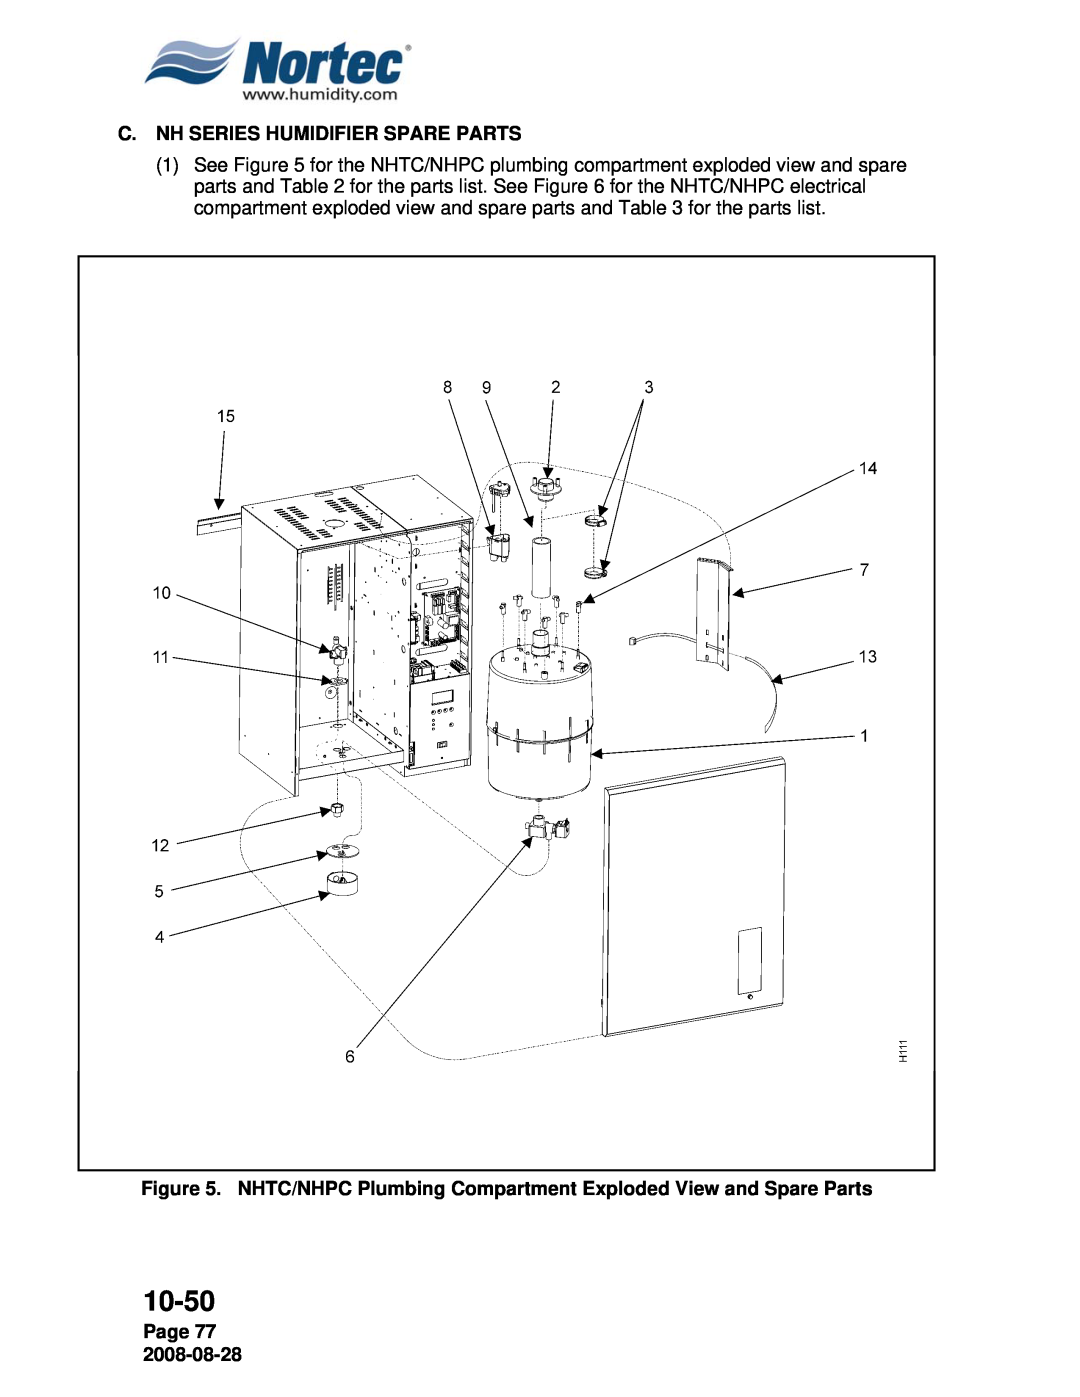 Nortec NH Series installation manual C.Nh Series Humidifier Spare Parts, Page 77, 10-50 